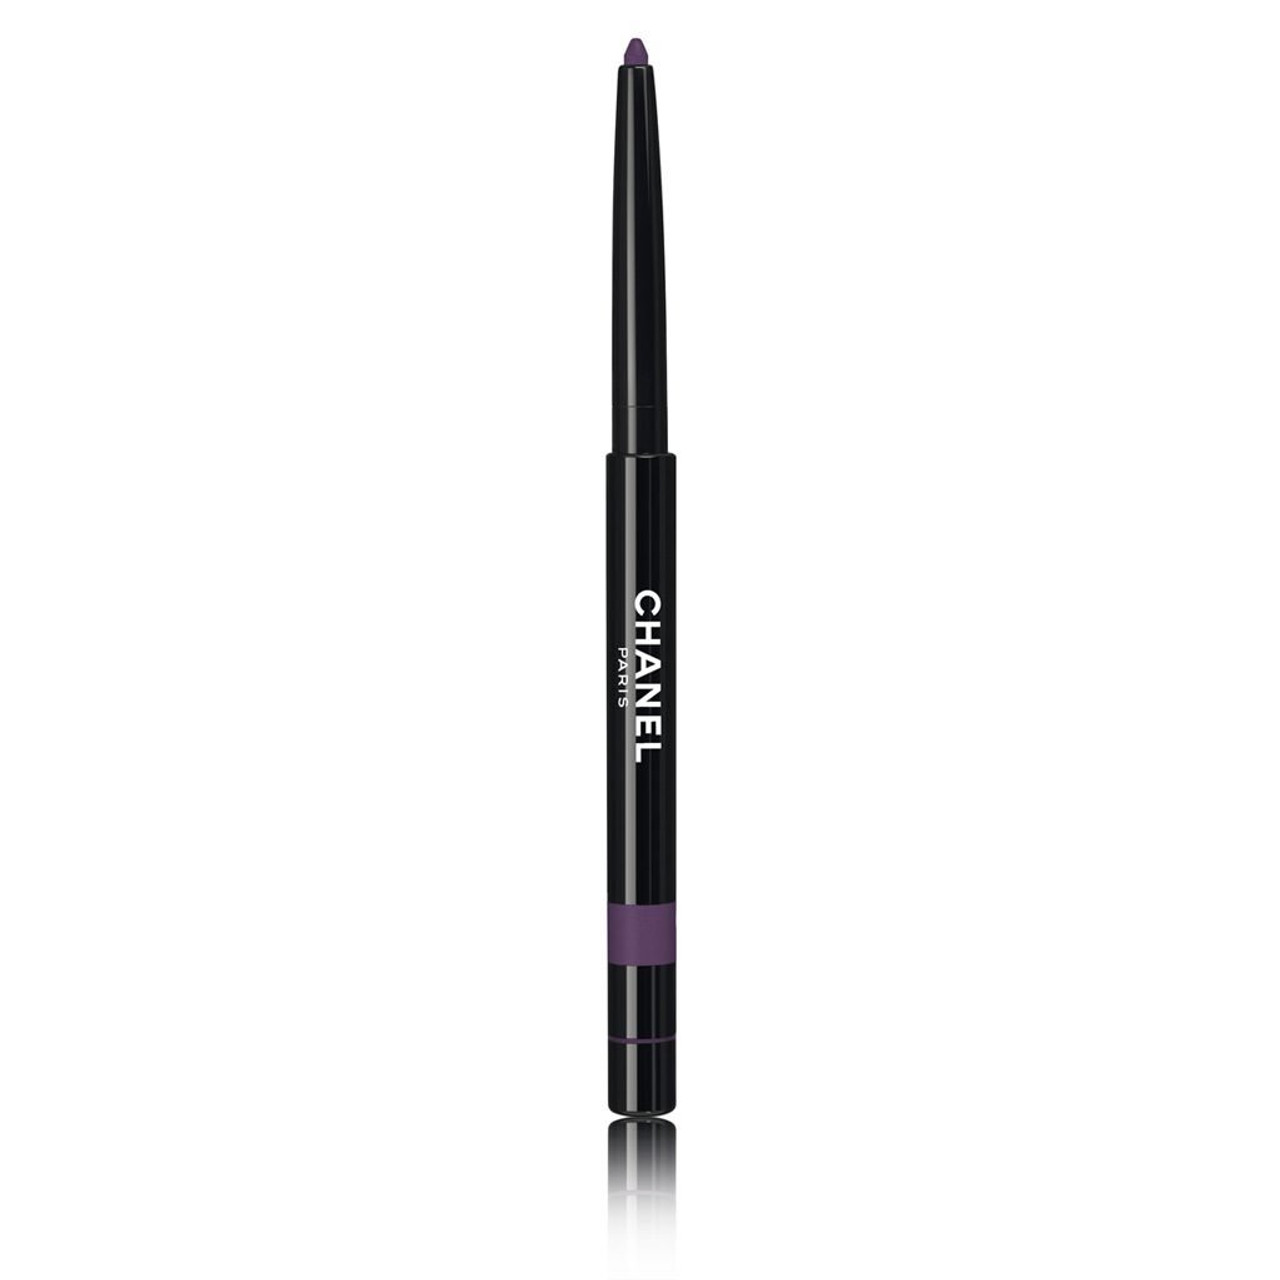 Chanel Stylo Yeux Waterproof - #83 Cassis 0.3g/0.01oz